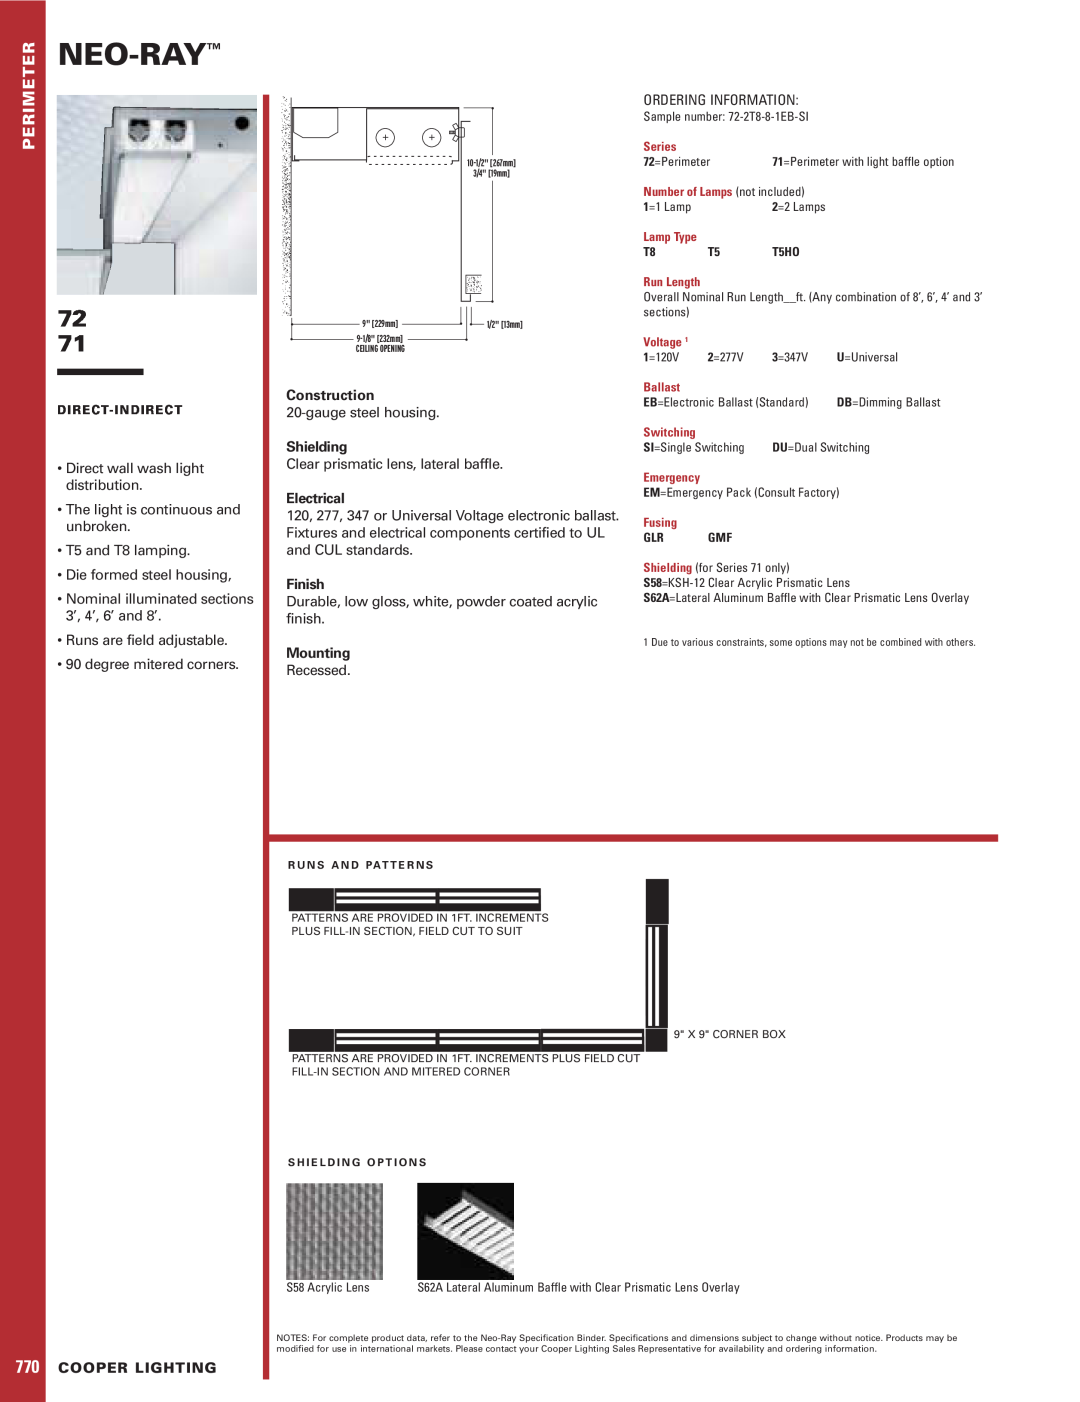 Cooper Lighting 71, 72 specifications Neo-Ray, Construction, Shielding, Electrical, Finish, Mounting, Cooper Lighting 